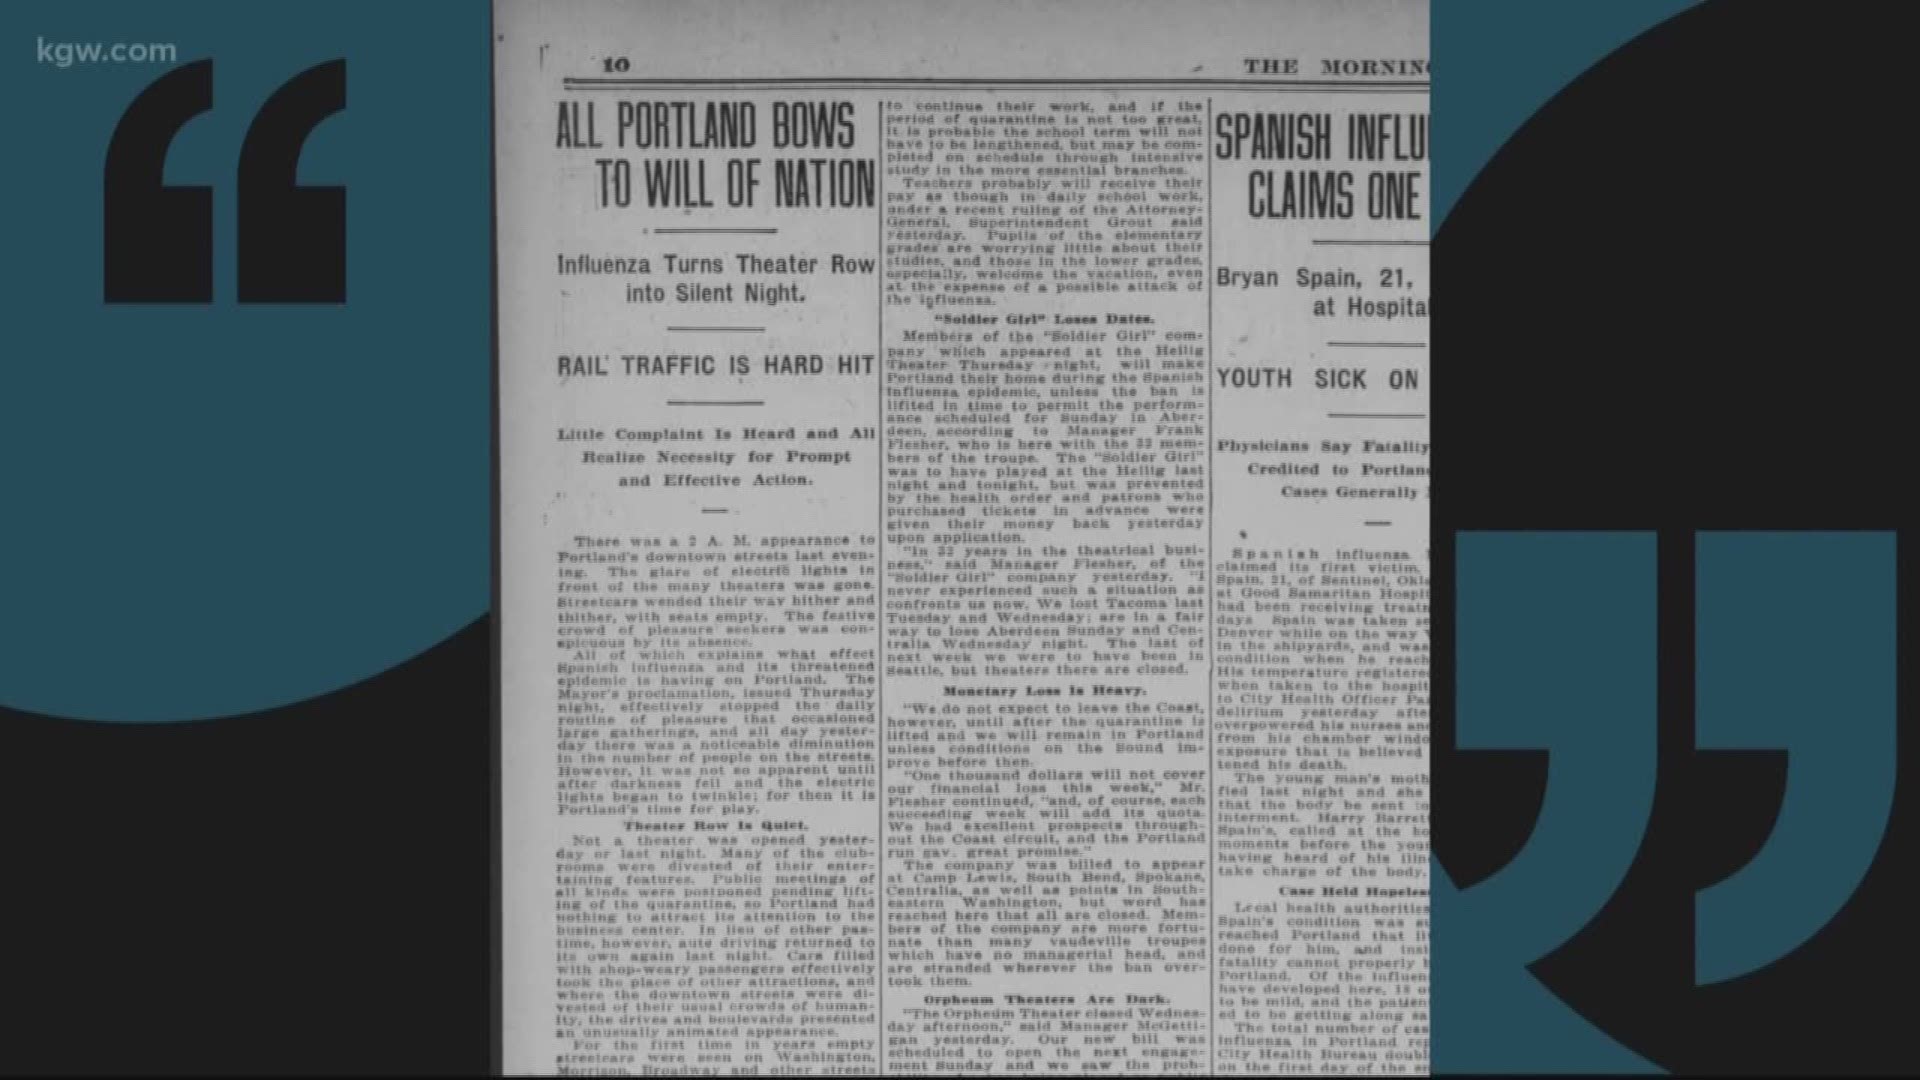 We look back at some old newspaper clippings from around the state from the 1918 outbreak of Spanish flu.